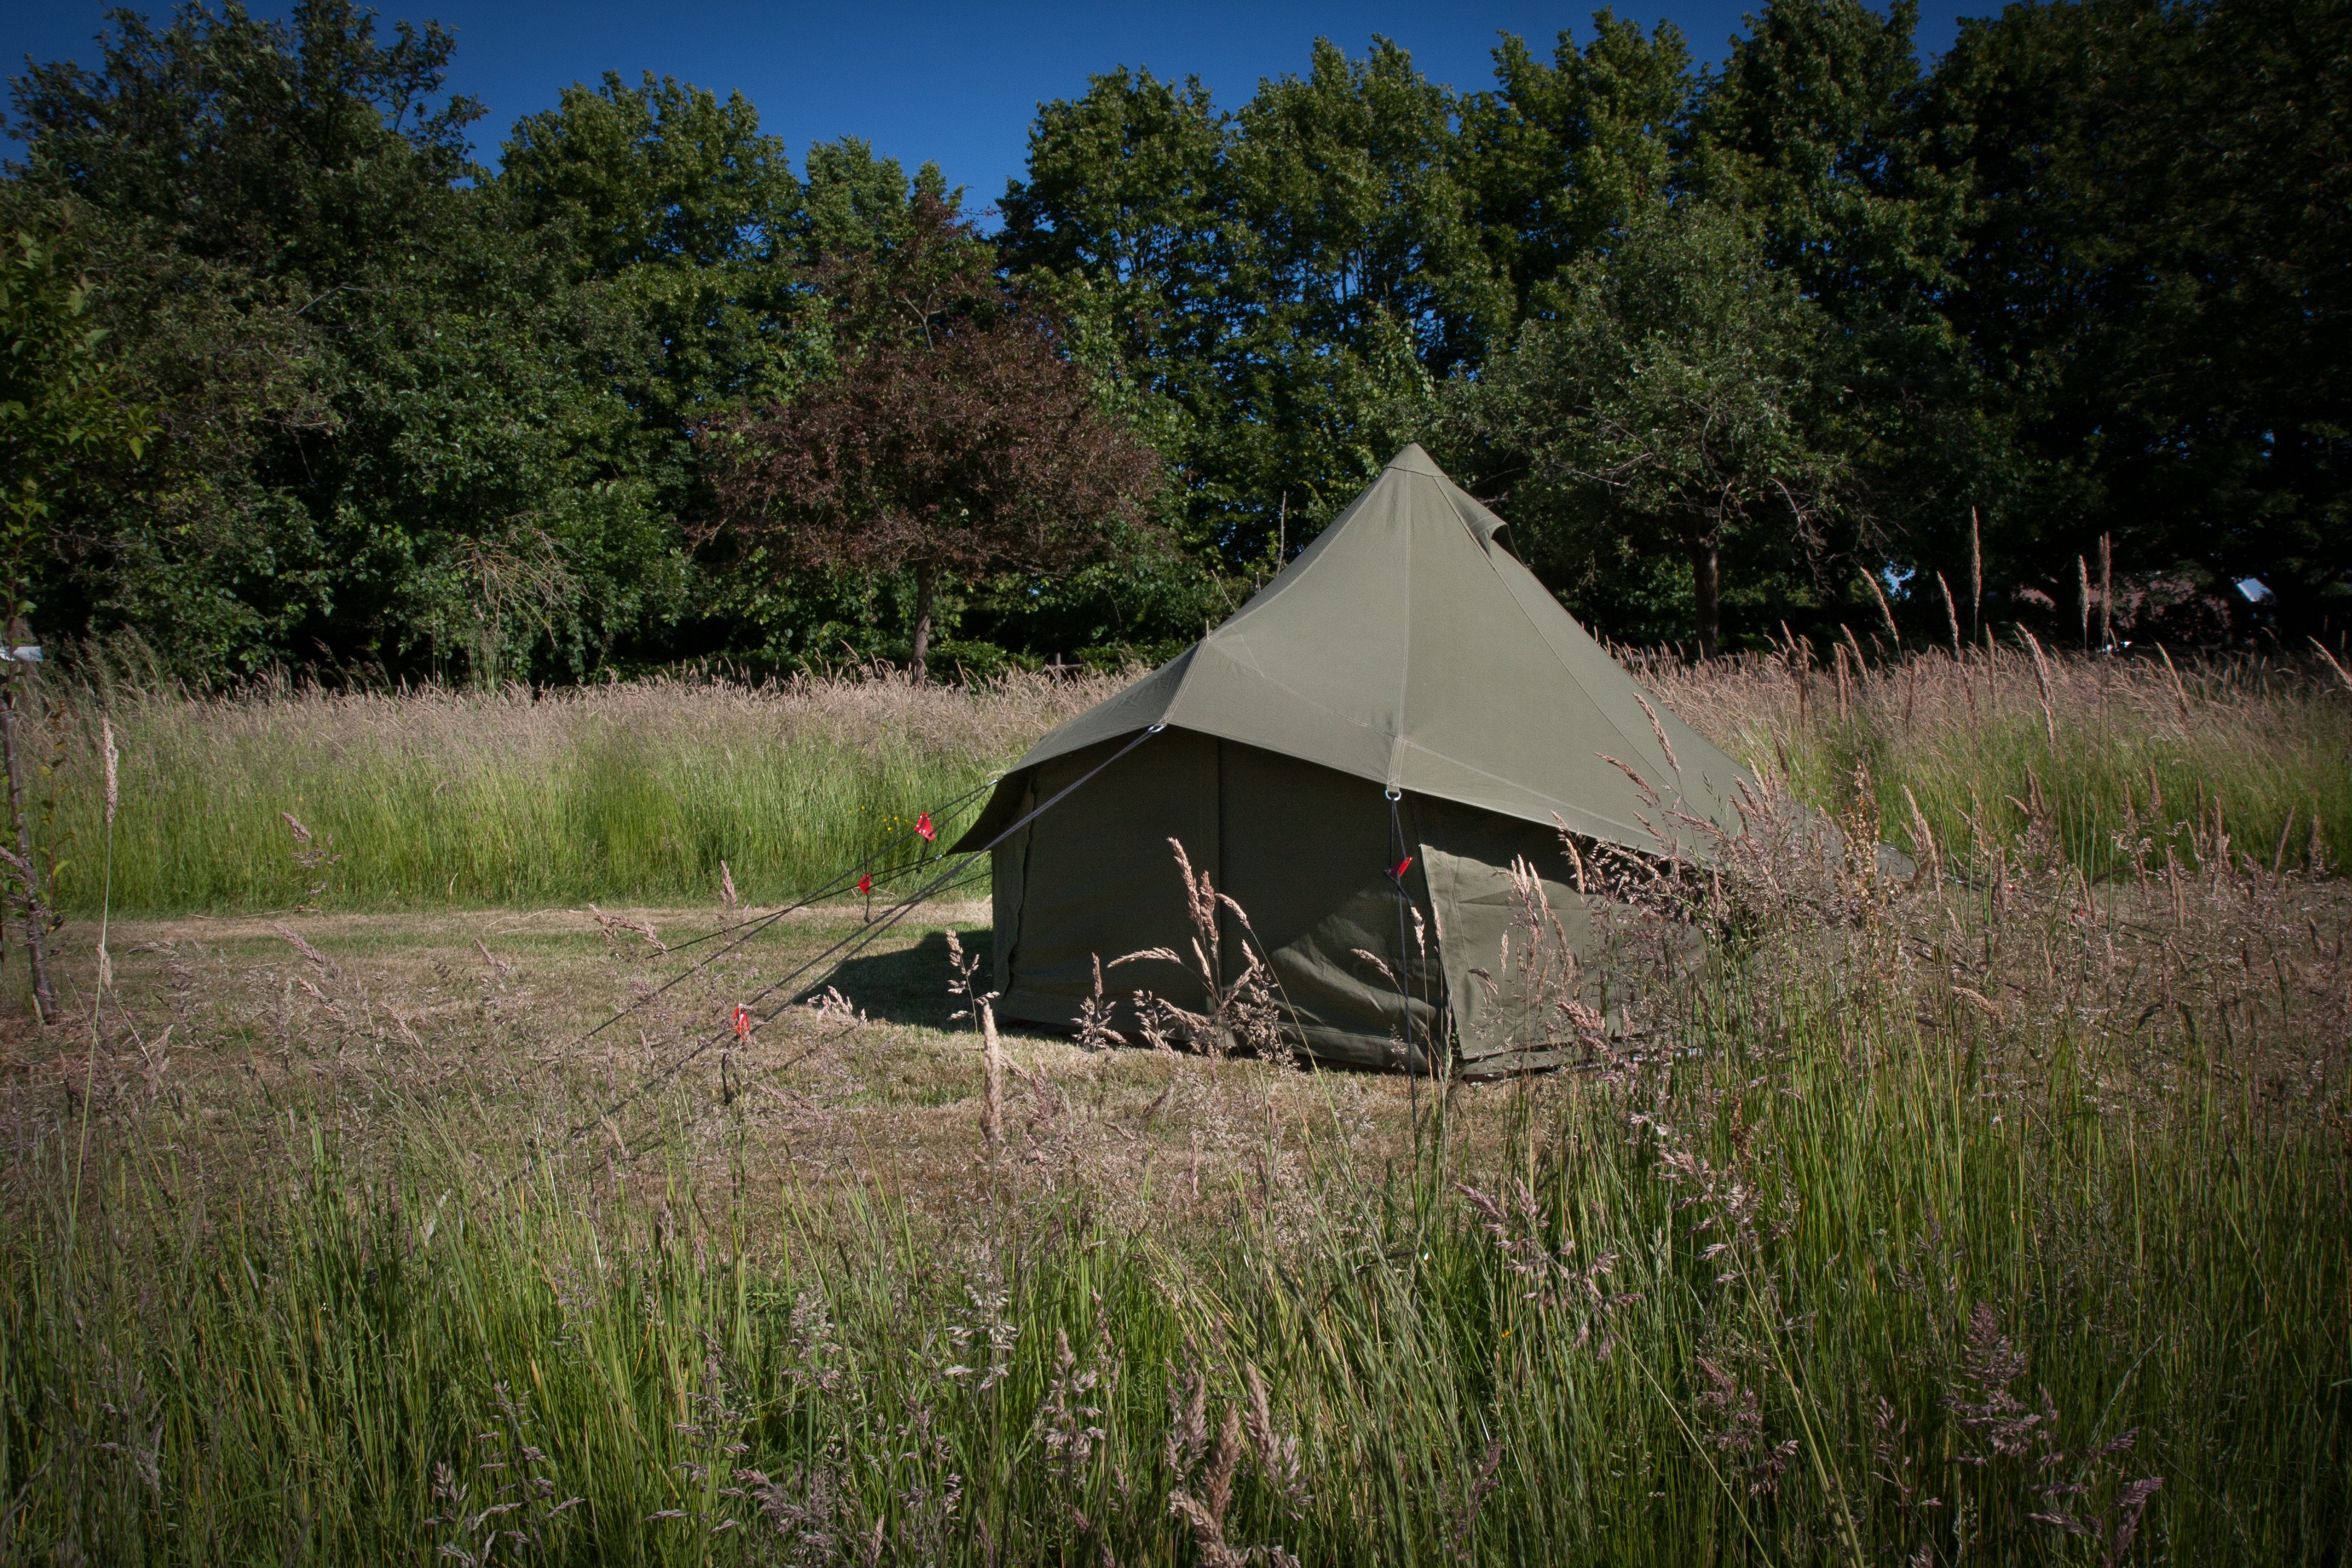 Camping in Belgium: Where, when and why?